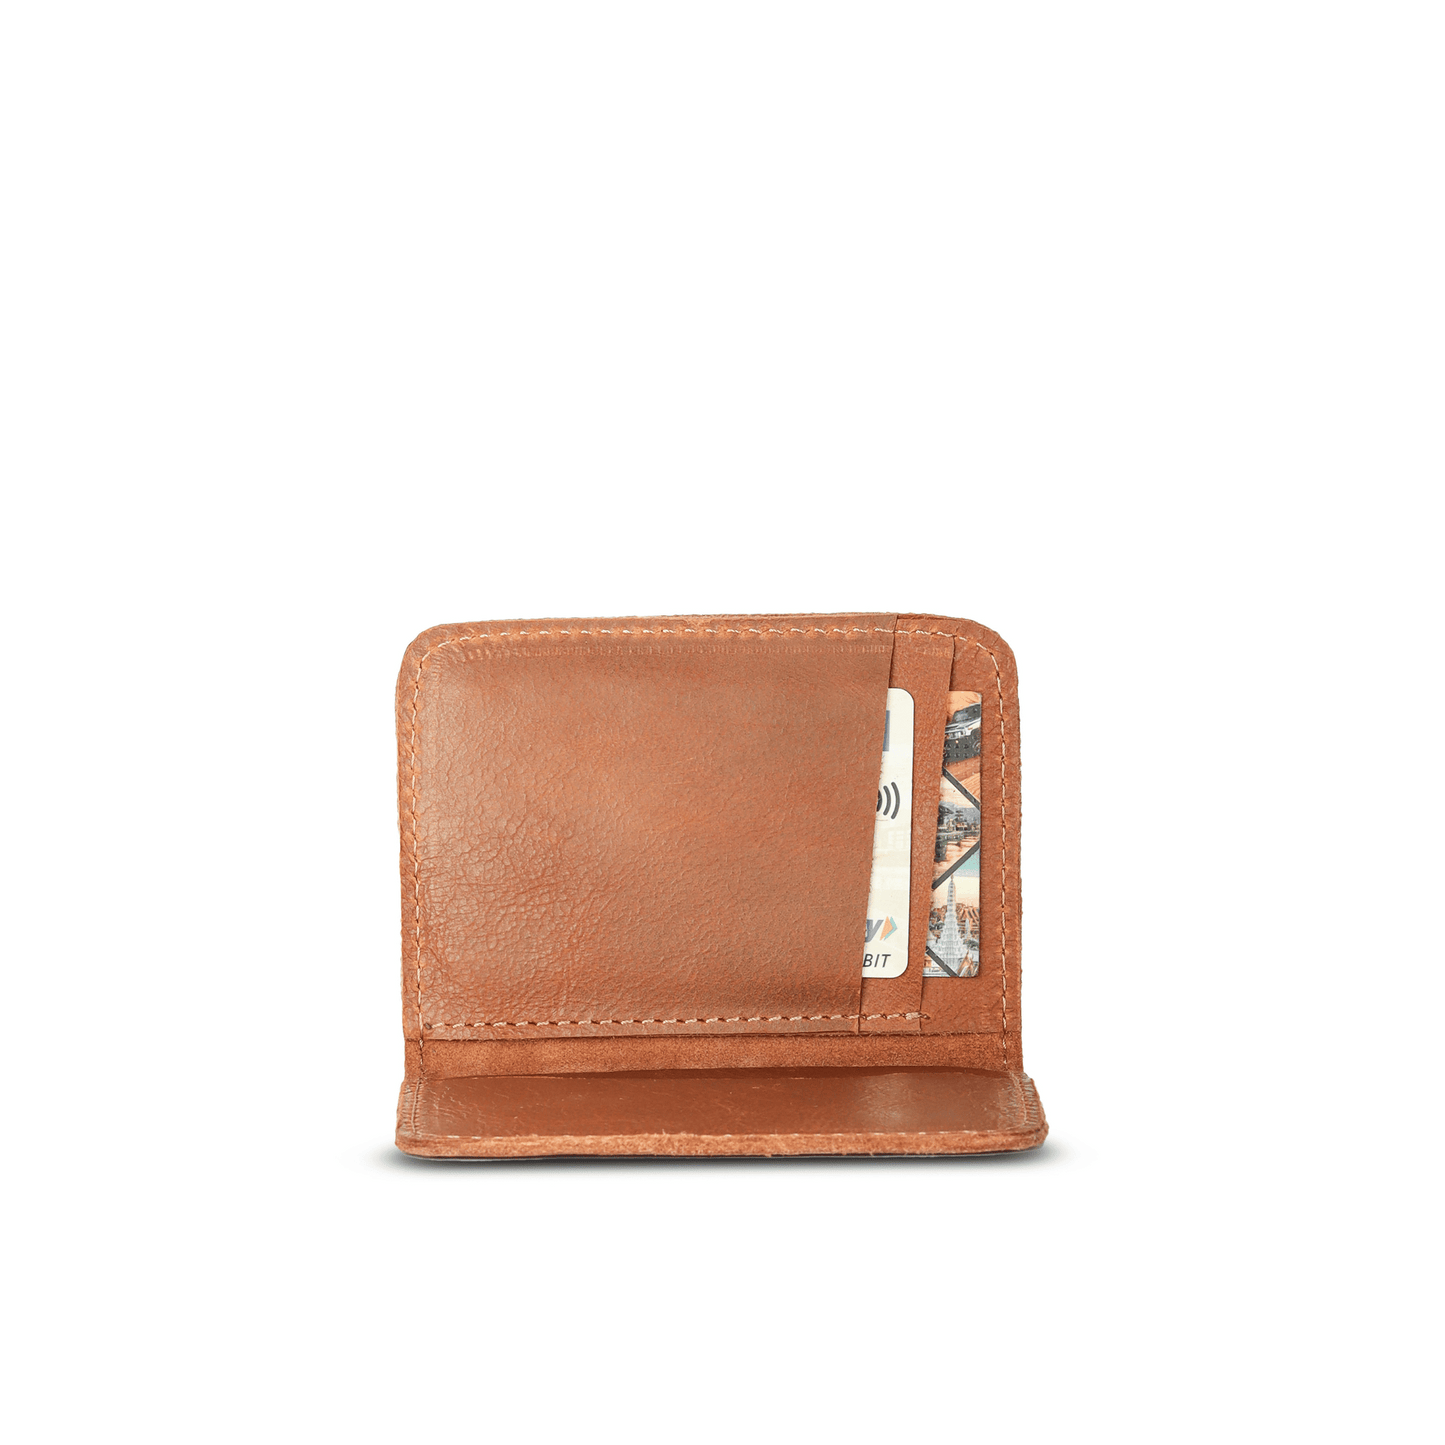 Cards Mate Card Holder Big Size  Tan Touch